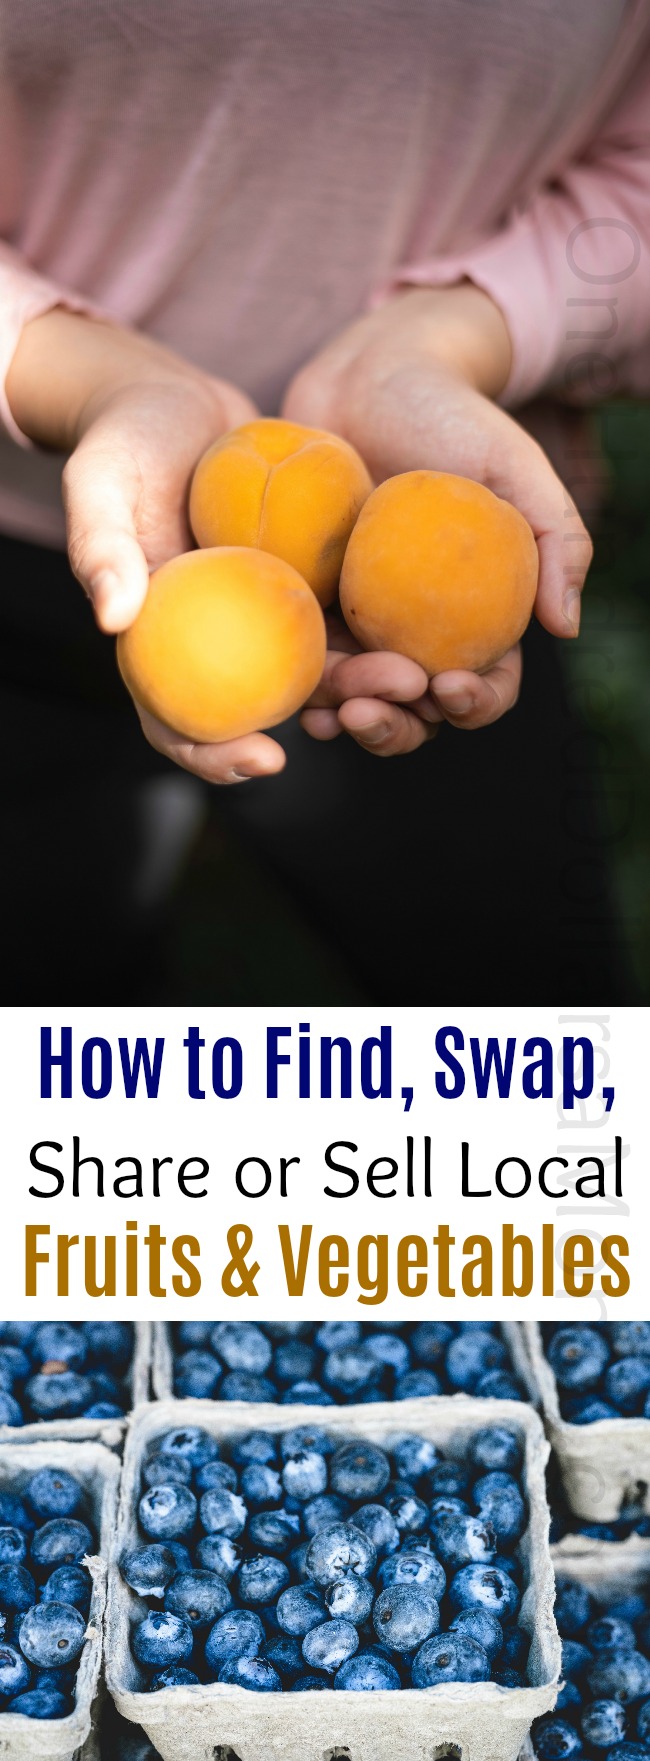 How to Find, Swap, Share or Sell Local Fruits and Vegetables